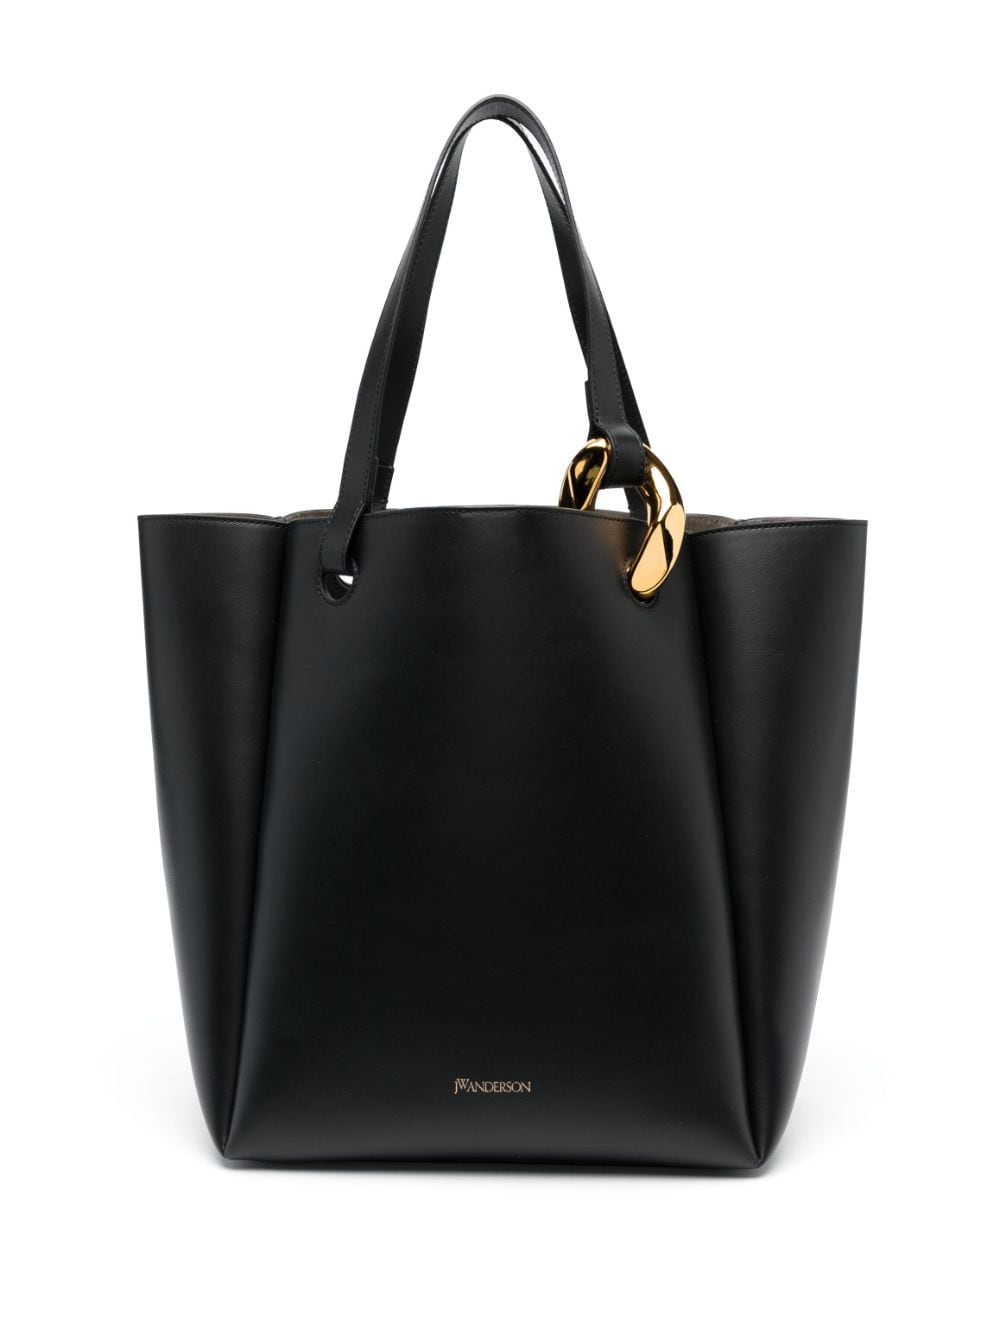 JW ANDERSON Stylish Chain Basket Tote for Women in Black